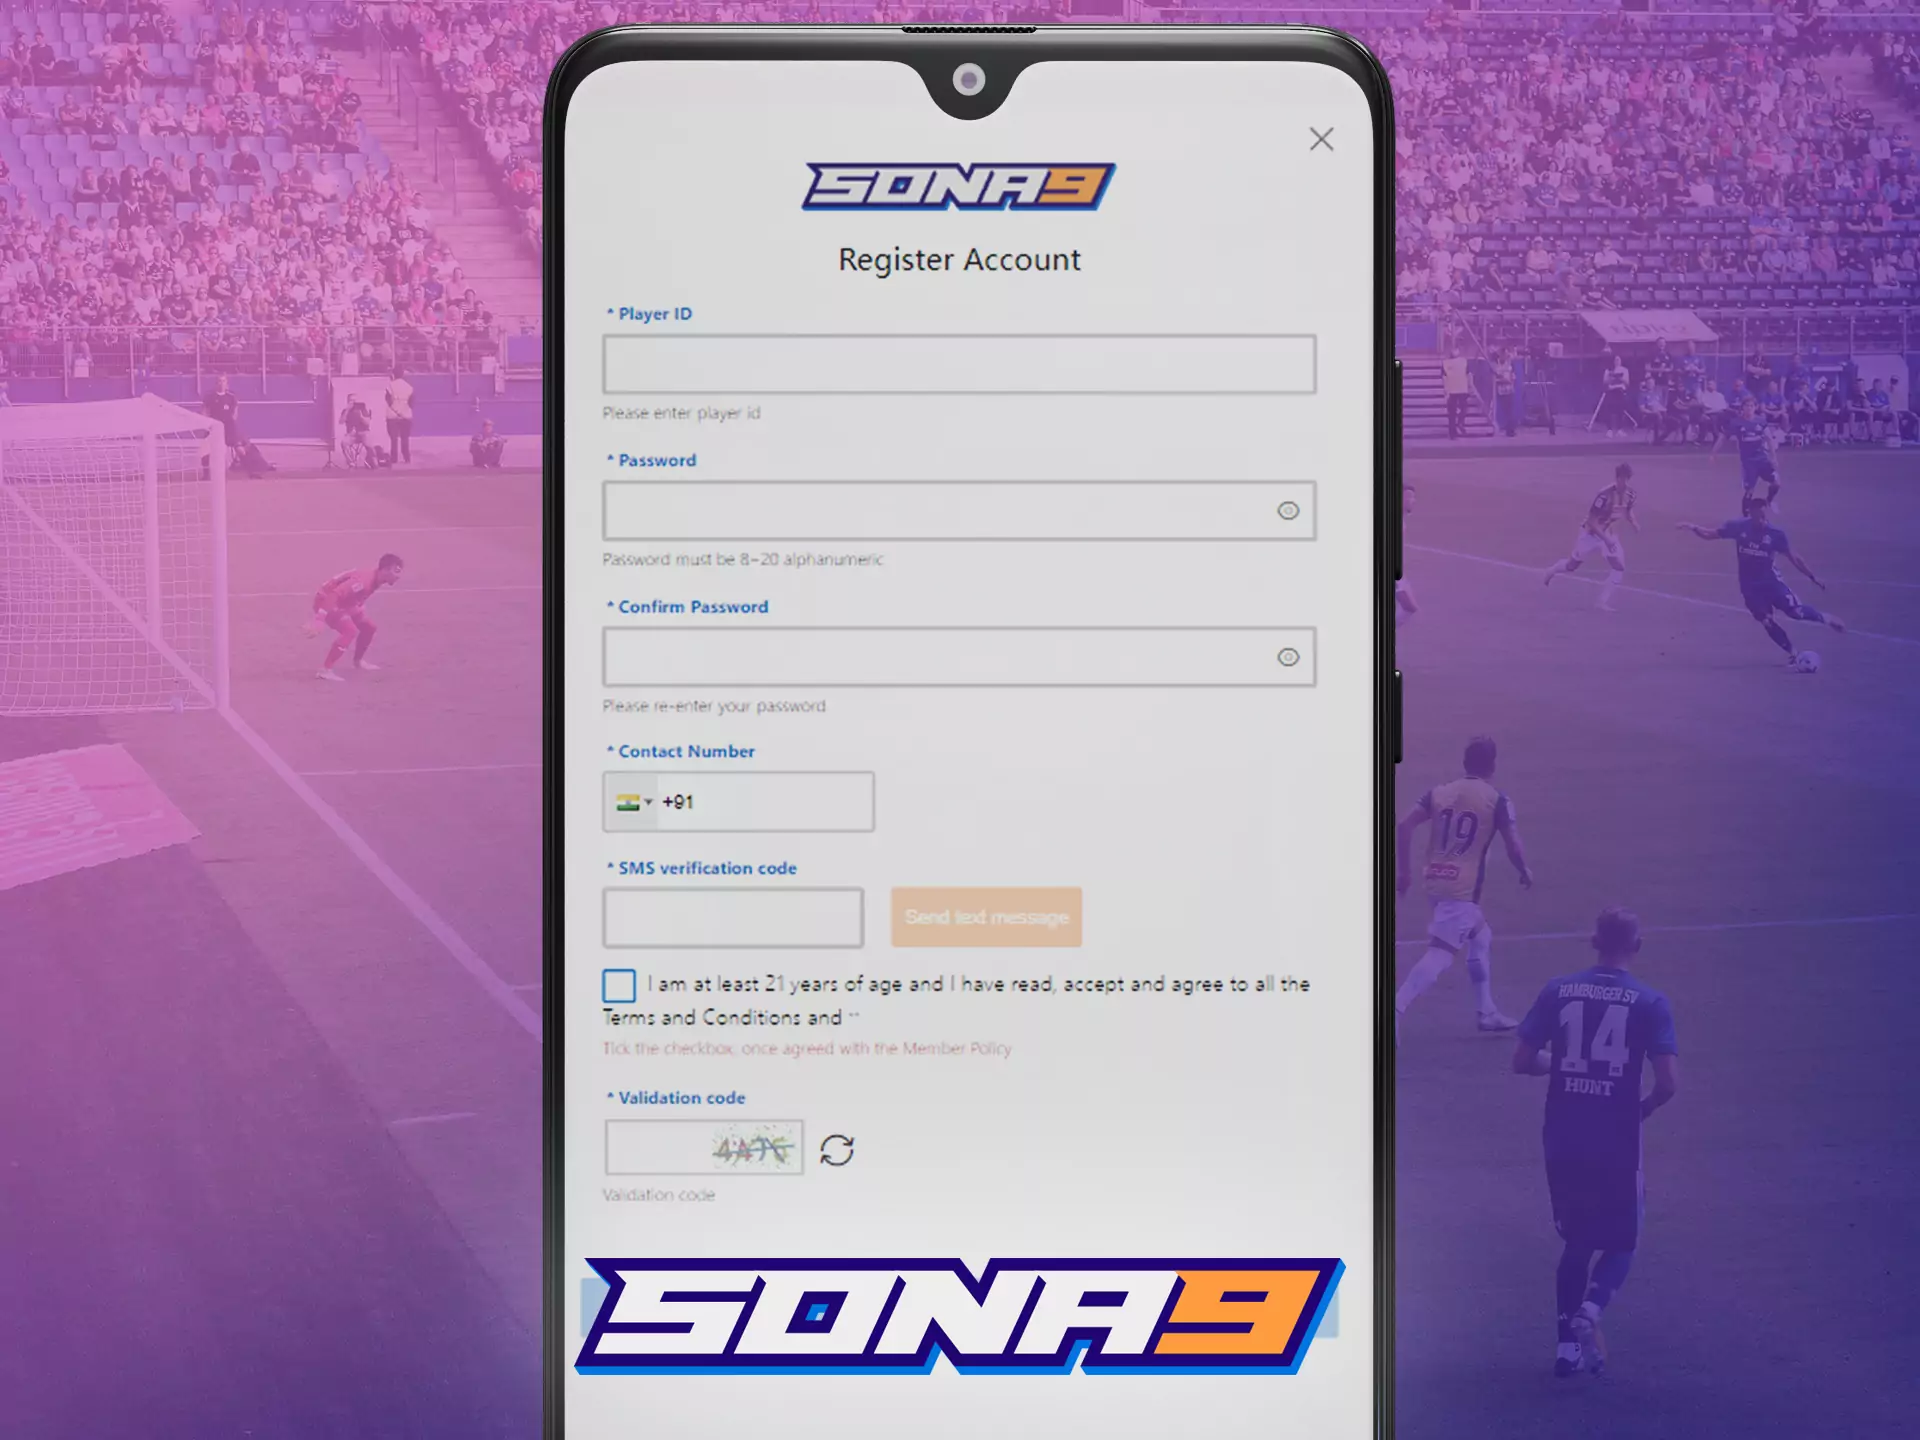 If you don't have a Sona9 account, you can register in the app.